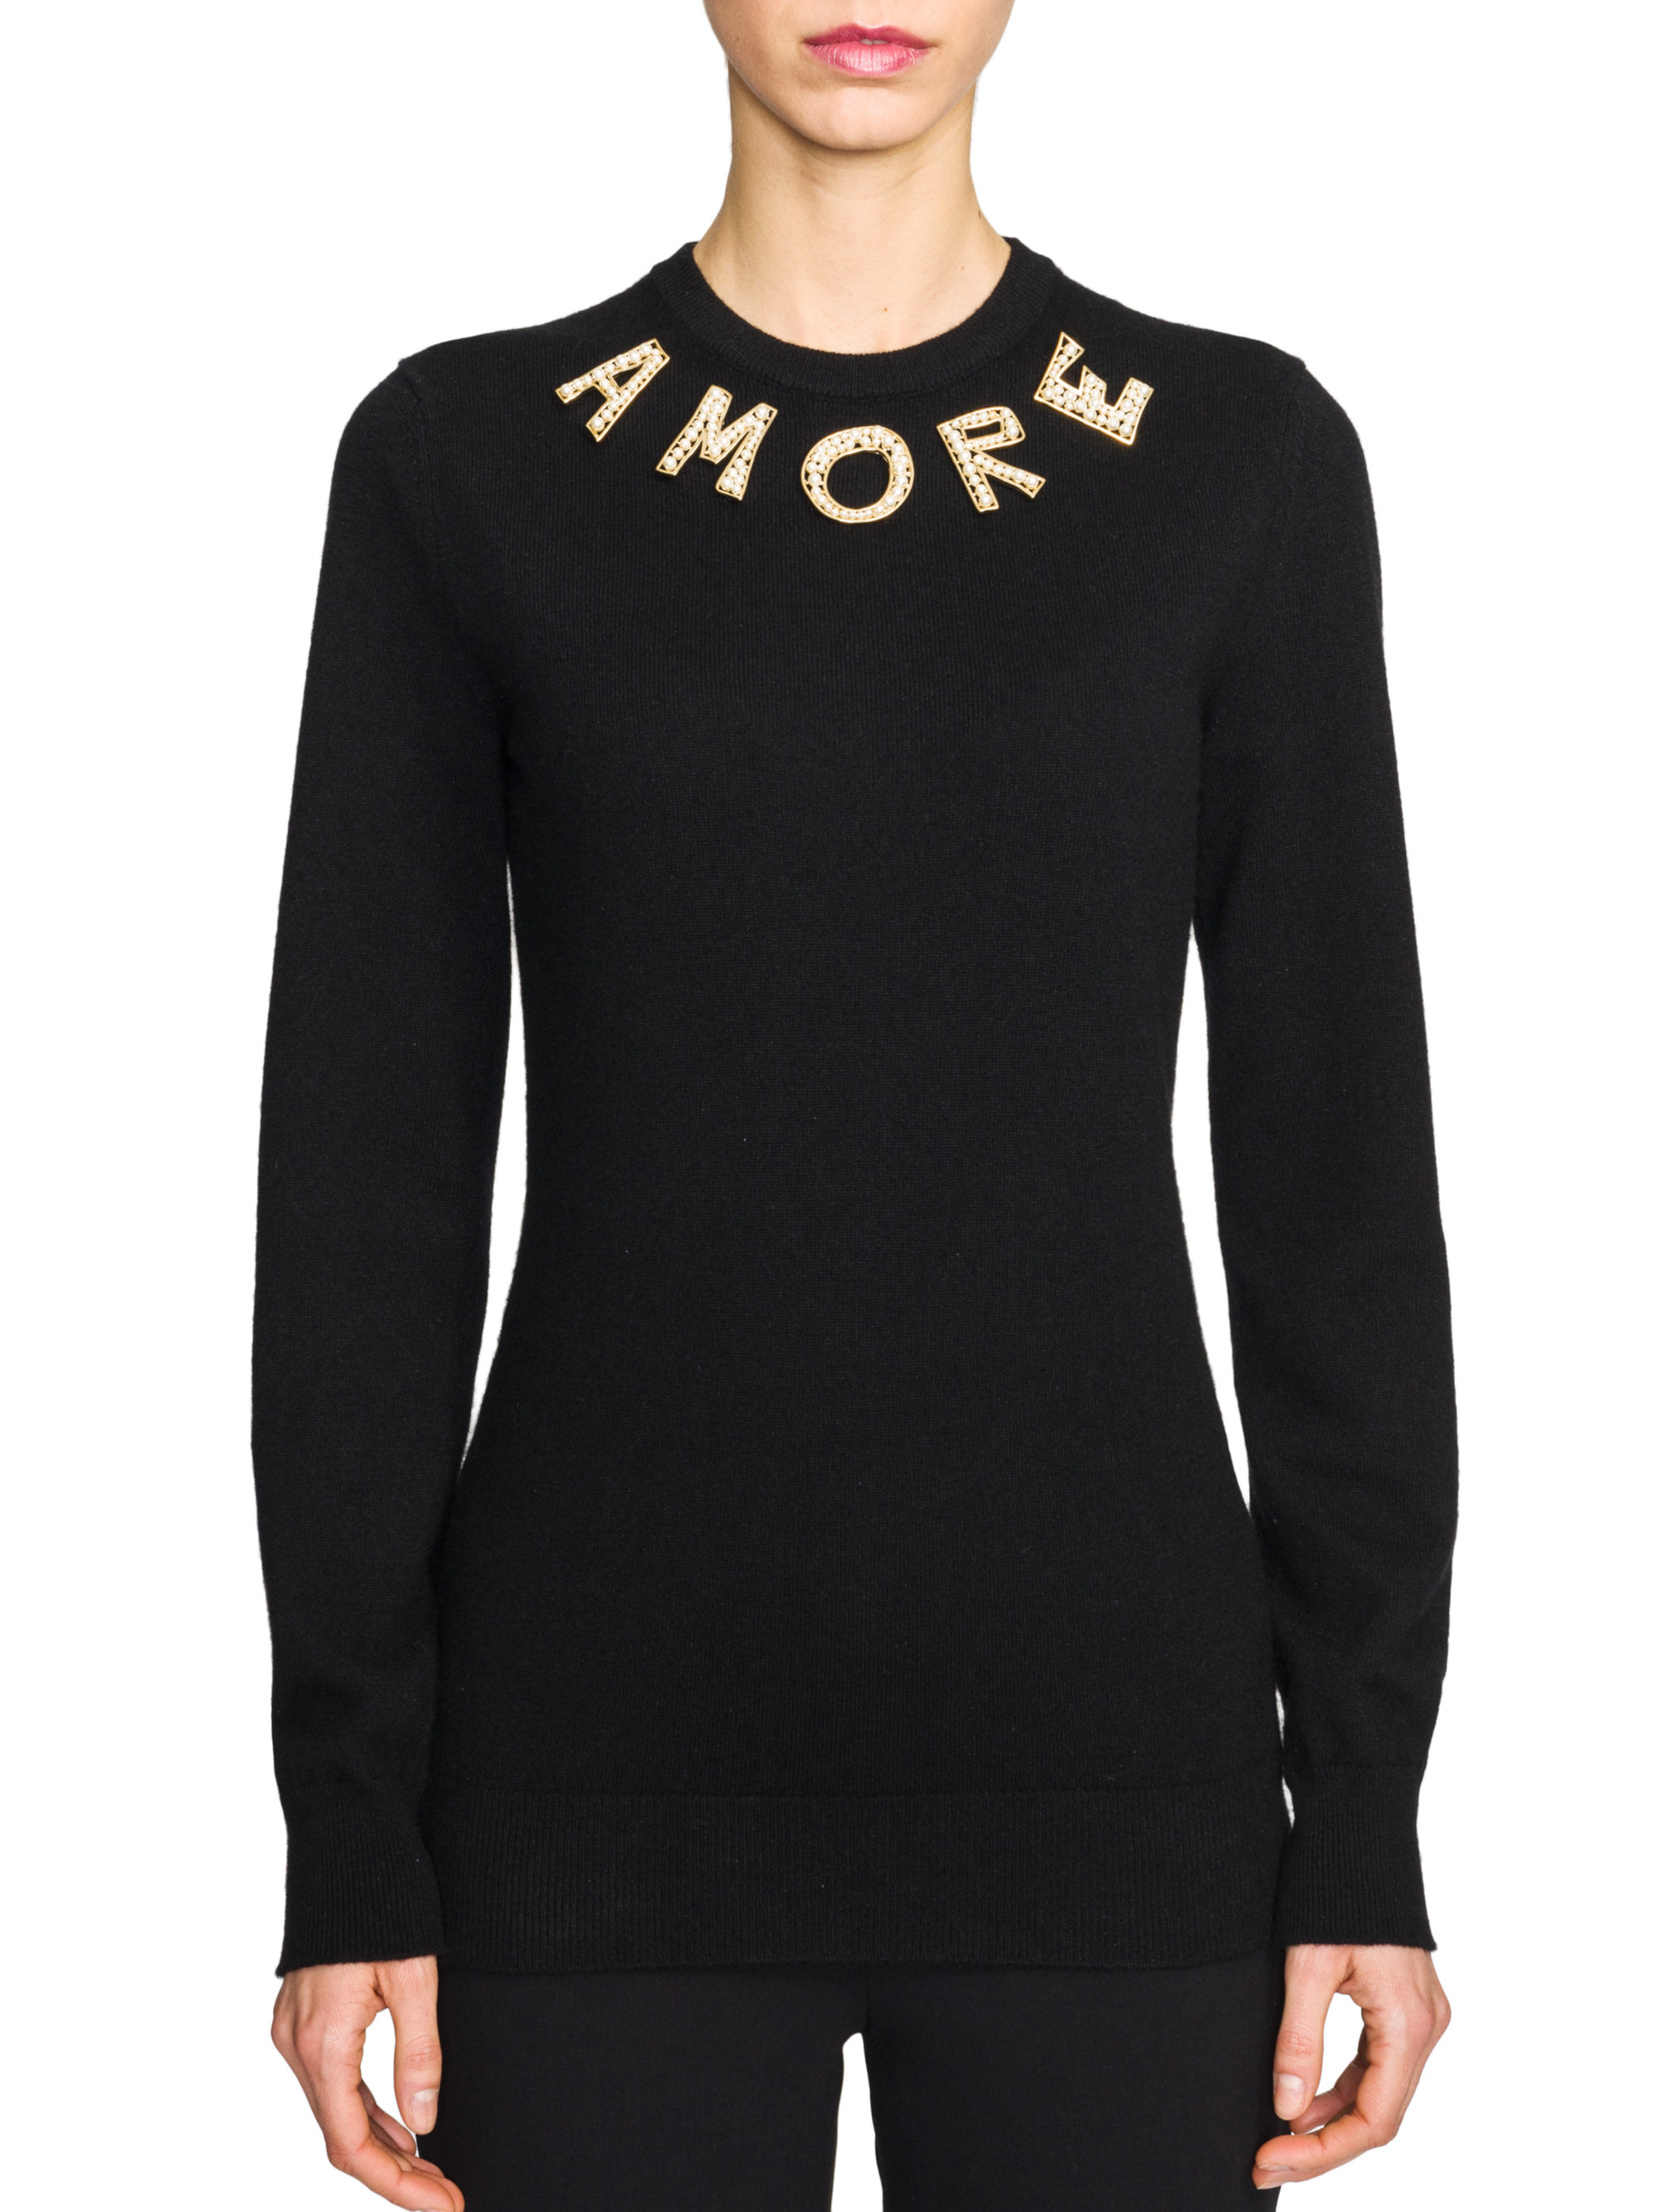 Lyst - Dolce & Gabbana Embellished Amore Cashmere Sweater in Black